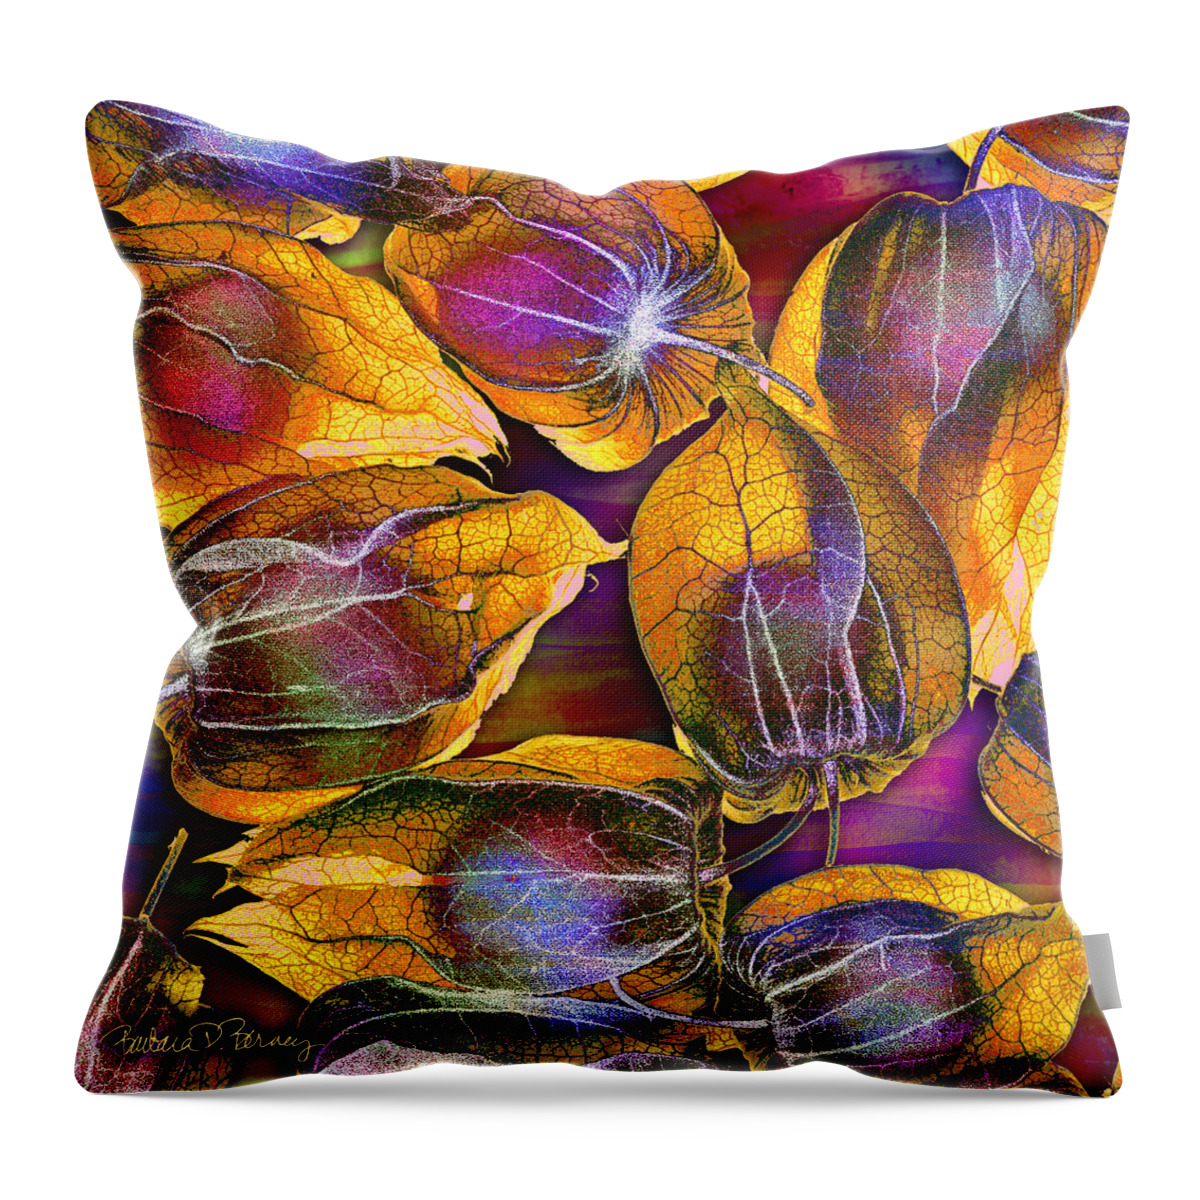 Gooseberry Throw Pillow featuring the digital art Goosed Berry Pods by Barbara Berney